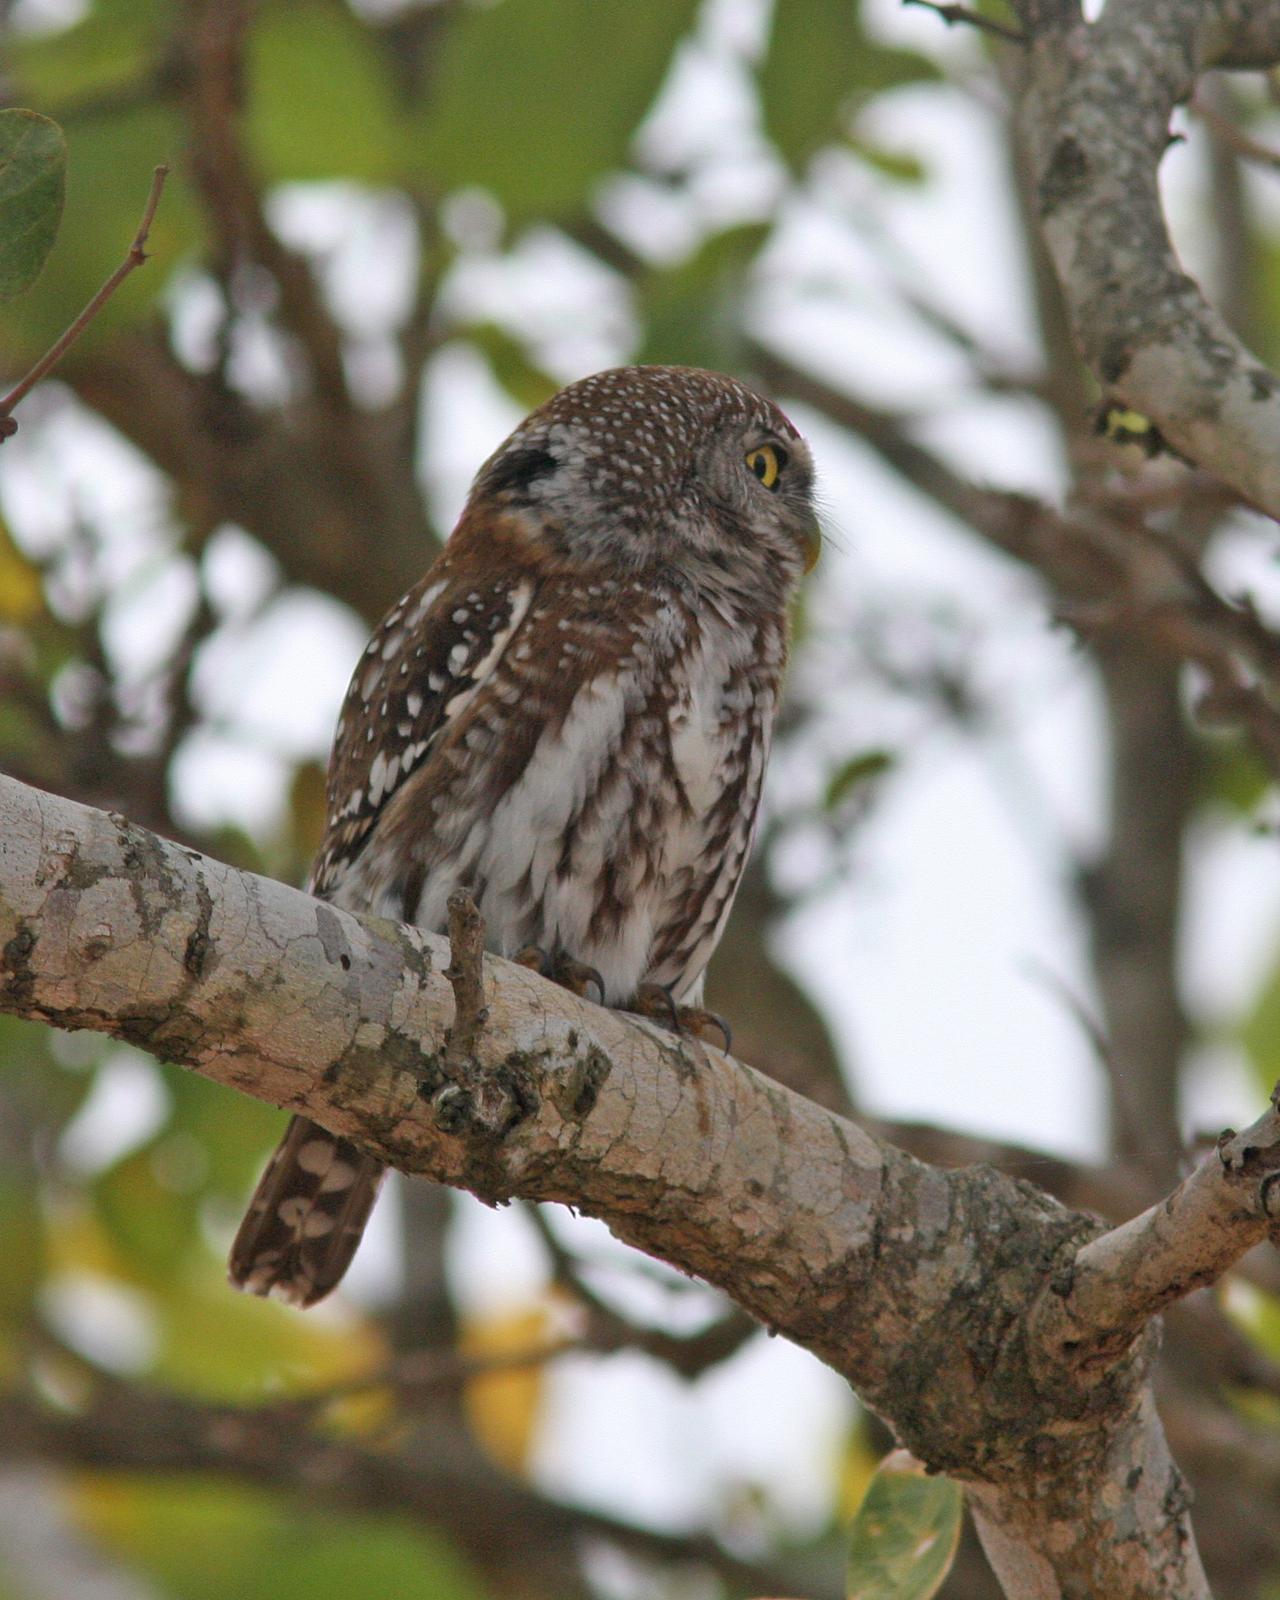 Pearl-spotted Owlet Photo by Henk Baptist